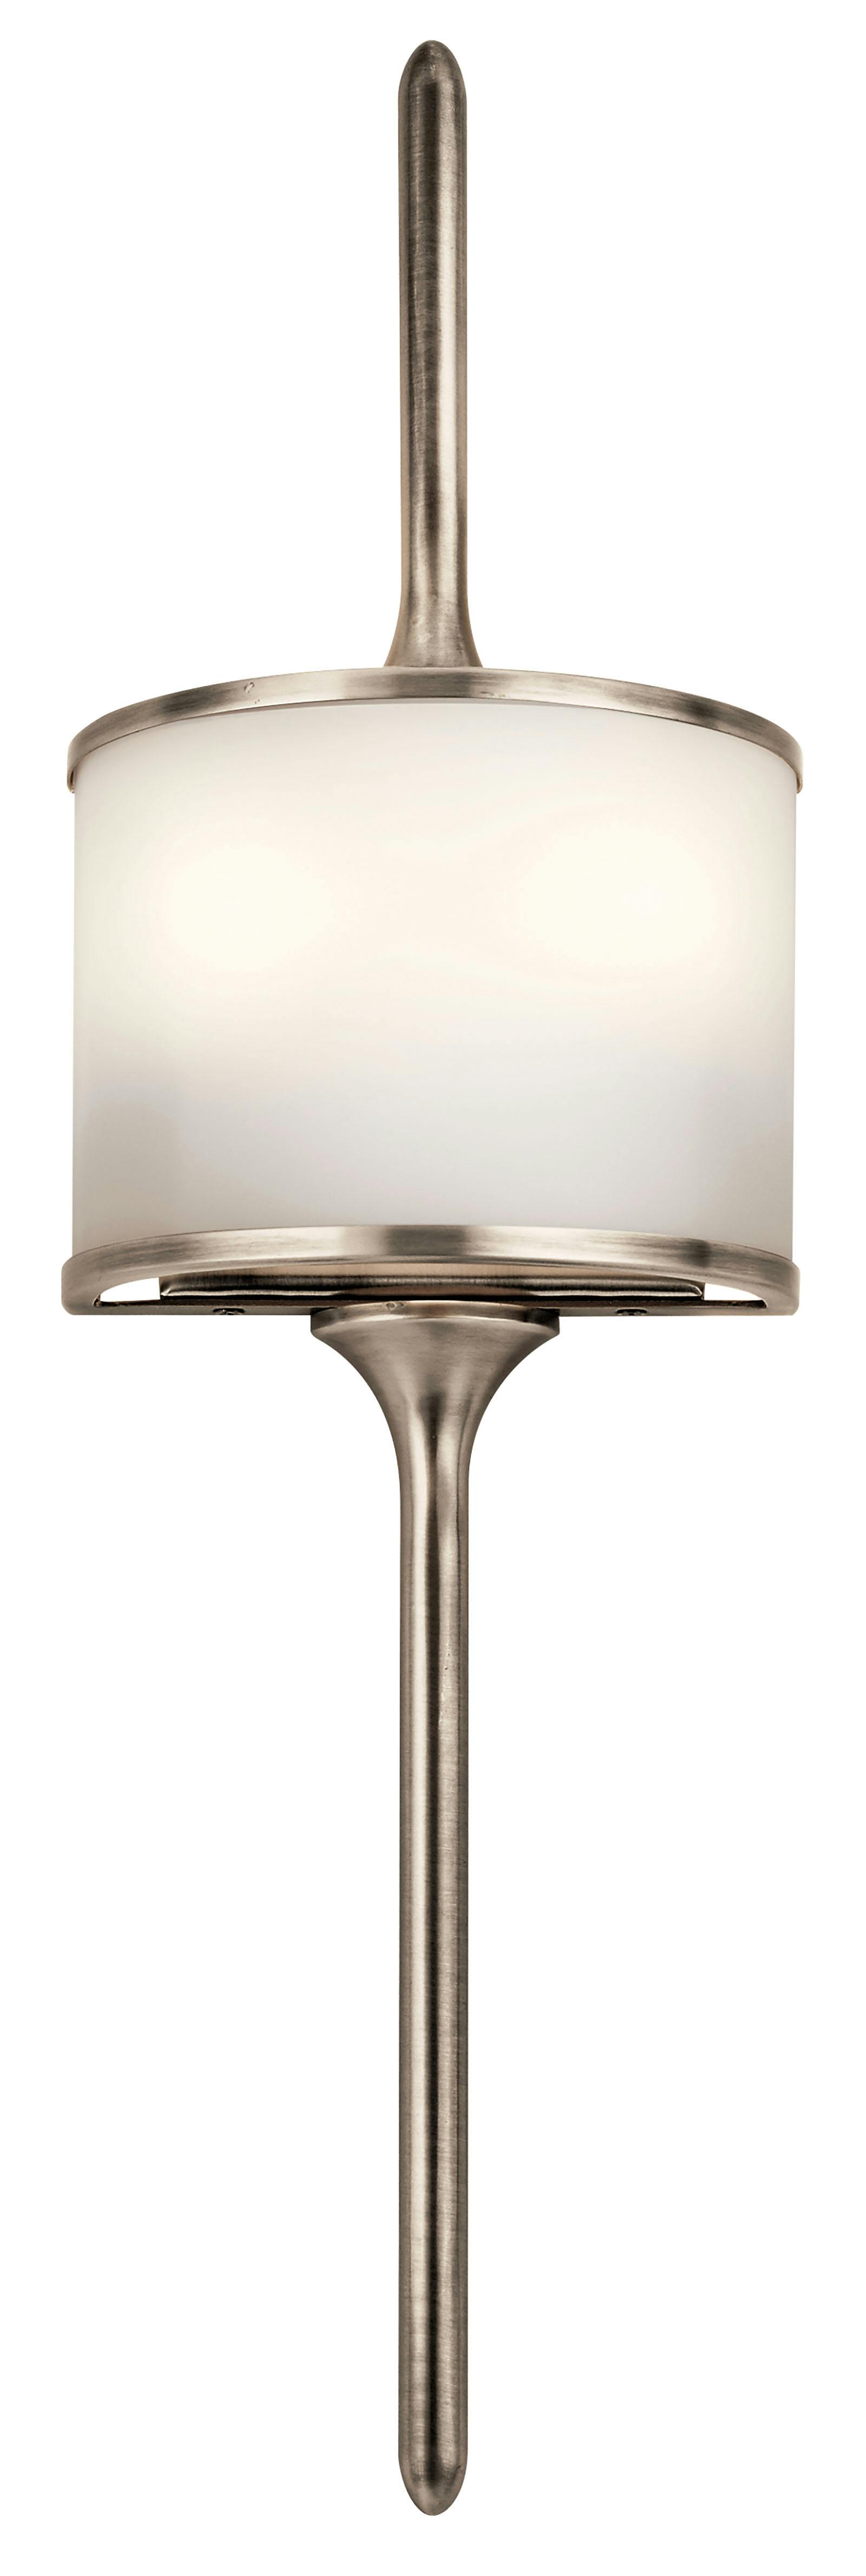 Front view of the Mona 22" 2 Light Halogen Sconce in Pewter on a white background